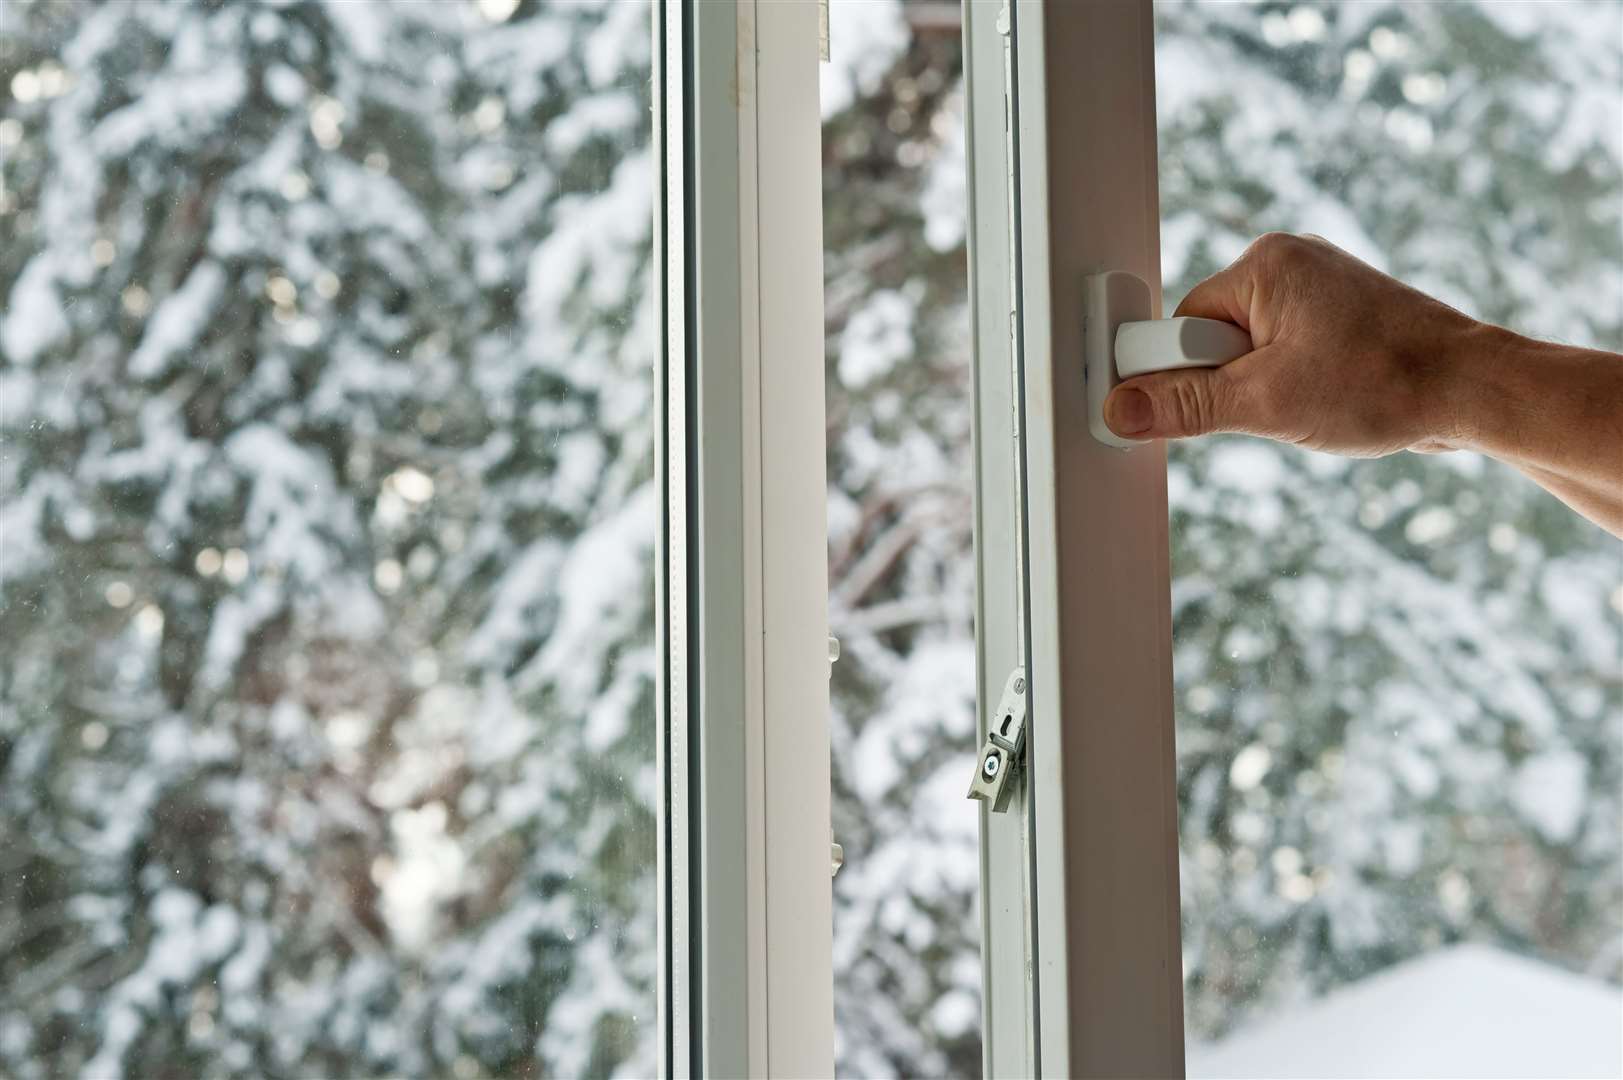 Opening doors and windows for 10 minutes can help you and your loved ones stay safe